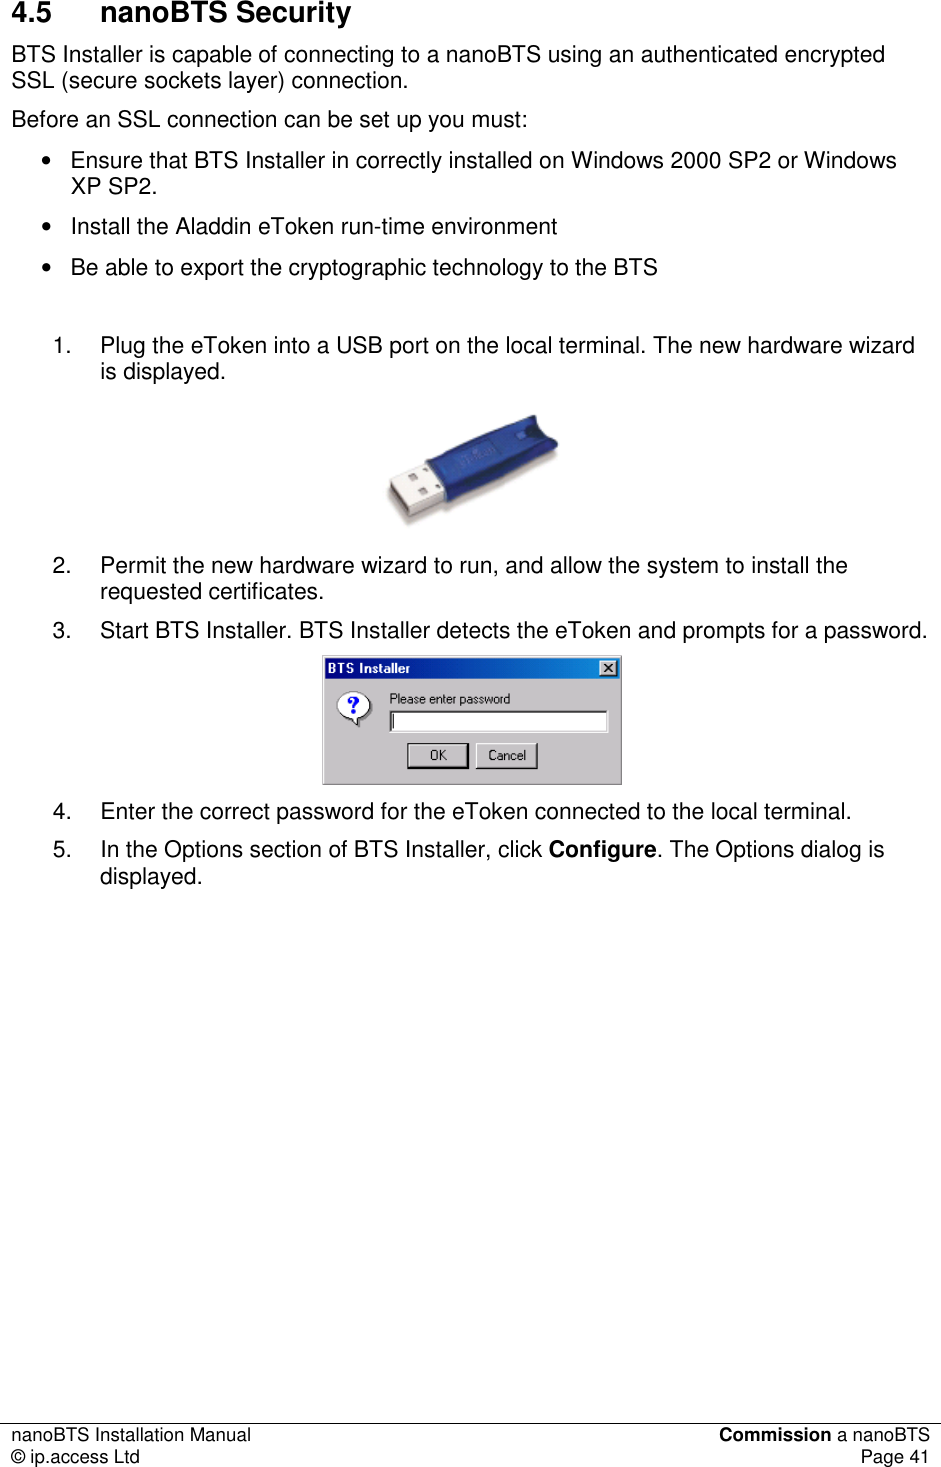 nanoBTS Installation Manual  Commission a nanoBTS © ip.access Ltd  Page 41  4.5  nanoBTS Security BTS Installer is capable of connecting to a nanoBTS using an authenticated encrypted SSL (secure sockets layer) connection. Before an SSL connection can be set up you must: •  Ensure that BTS Installer in correctly installed on Windows 2000 SP2 or Windows XP SP2. •  Install the Aladdin eToken run-time environment •  Be able to export the cryptographic technology to the BTS  1.  Plug the eToken into a USB port on the local terminal. The new hardware wizard is displayed.  2.  Permit the new hardware wizard to run, and allow the system to install the requested certificates. 3.  Start BTS Installer. BTS Installer detects the eToken and prompts for a password.   4.  Enter the correct password for the eToken connected to the local terminal. 5.  In the Options section of BTS Installer, click Configure. The Options dialog is displayed. 